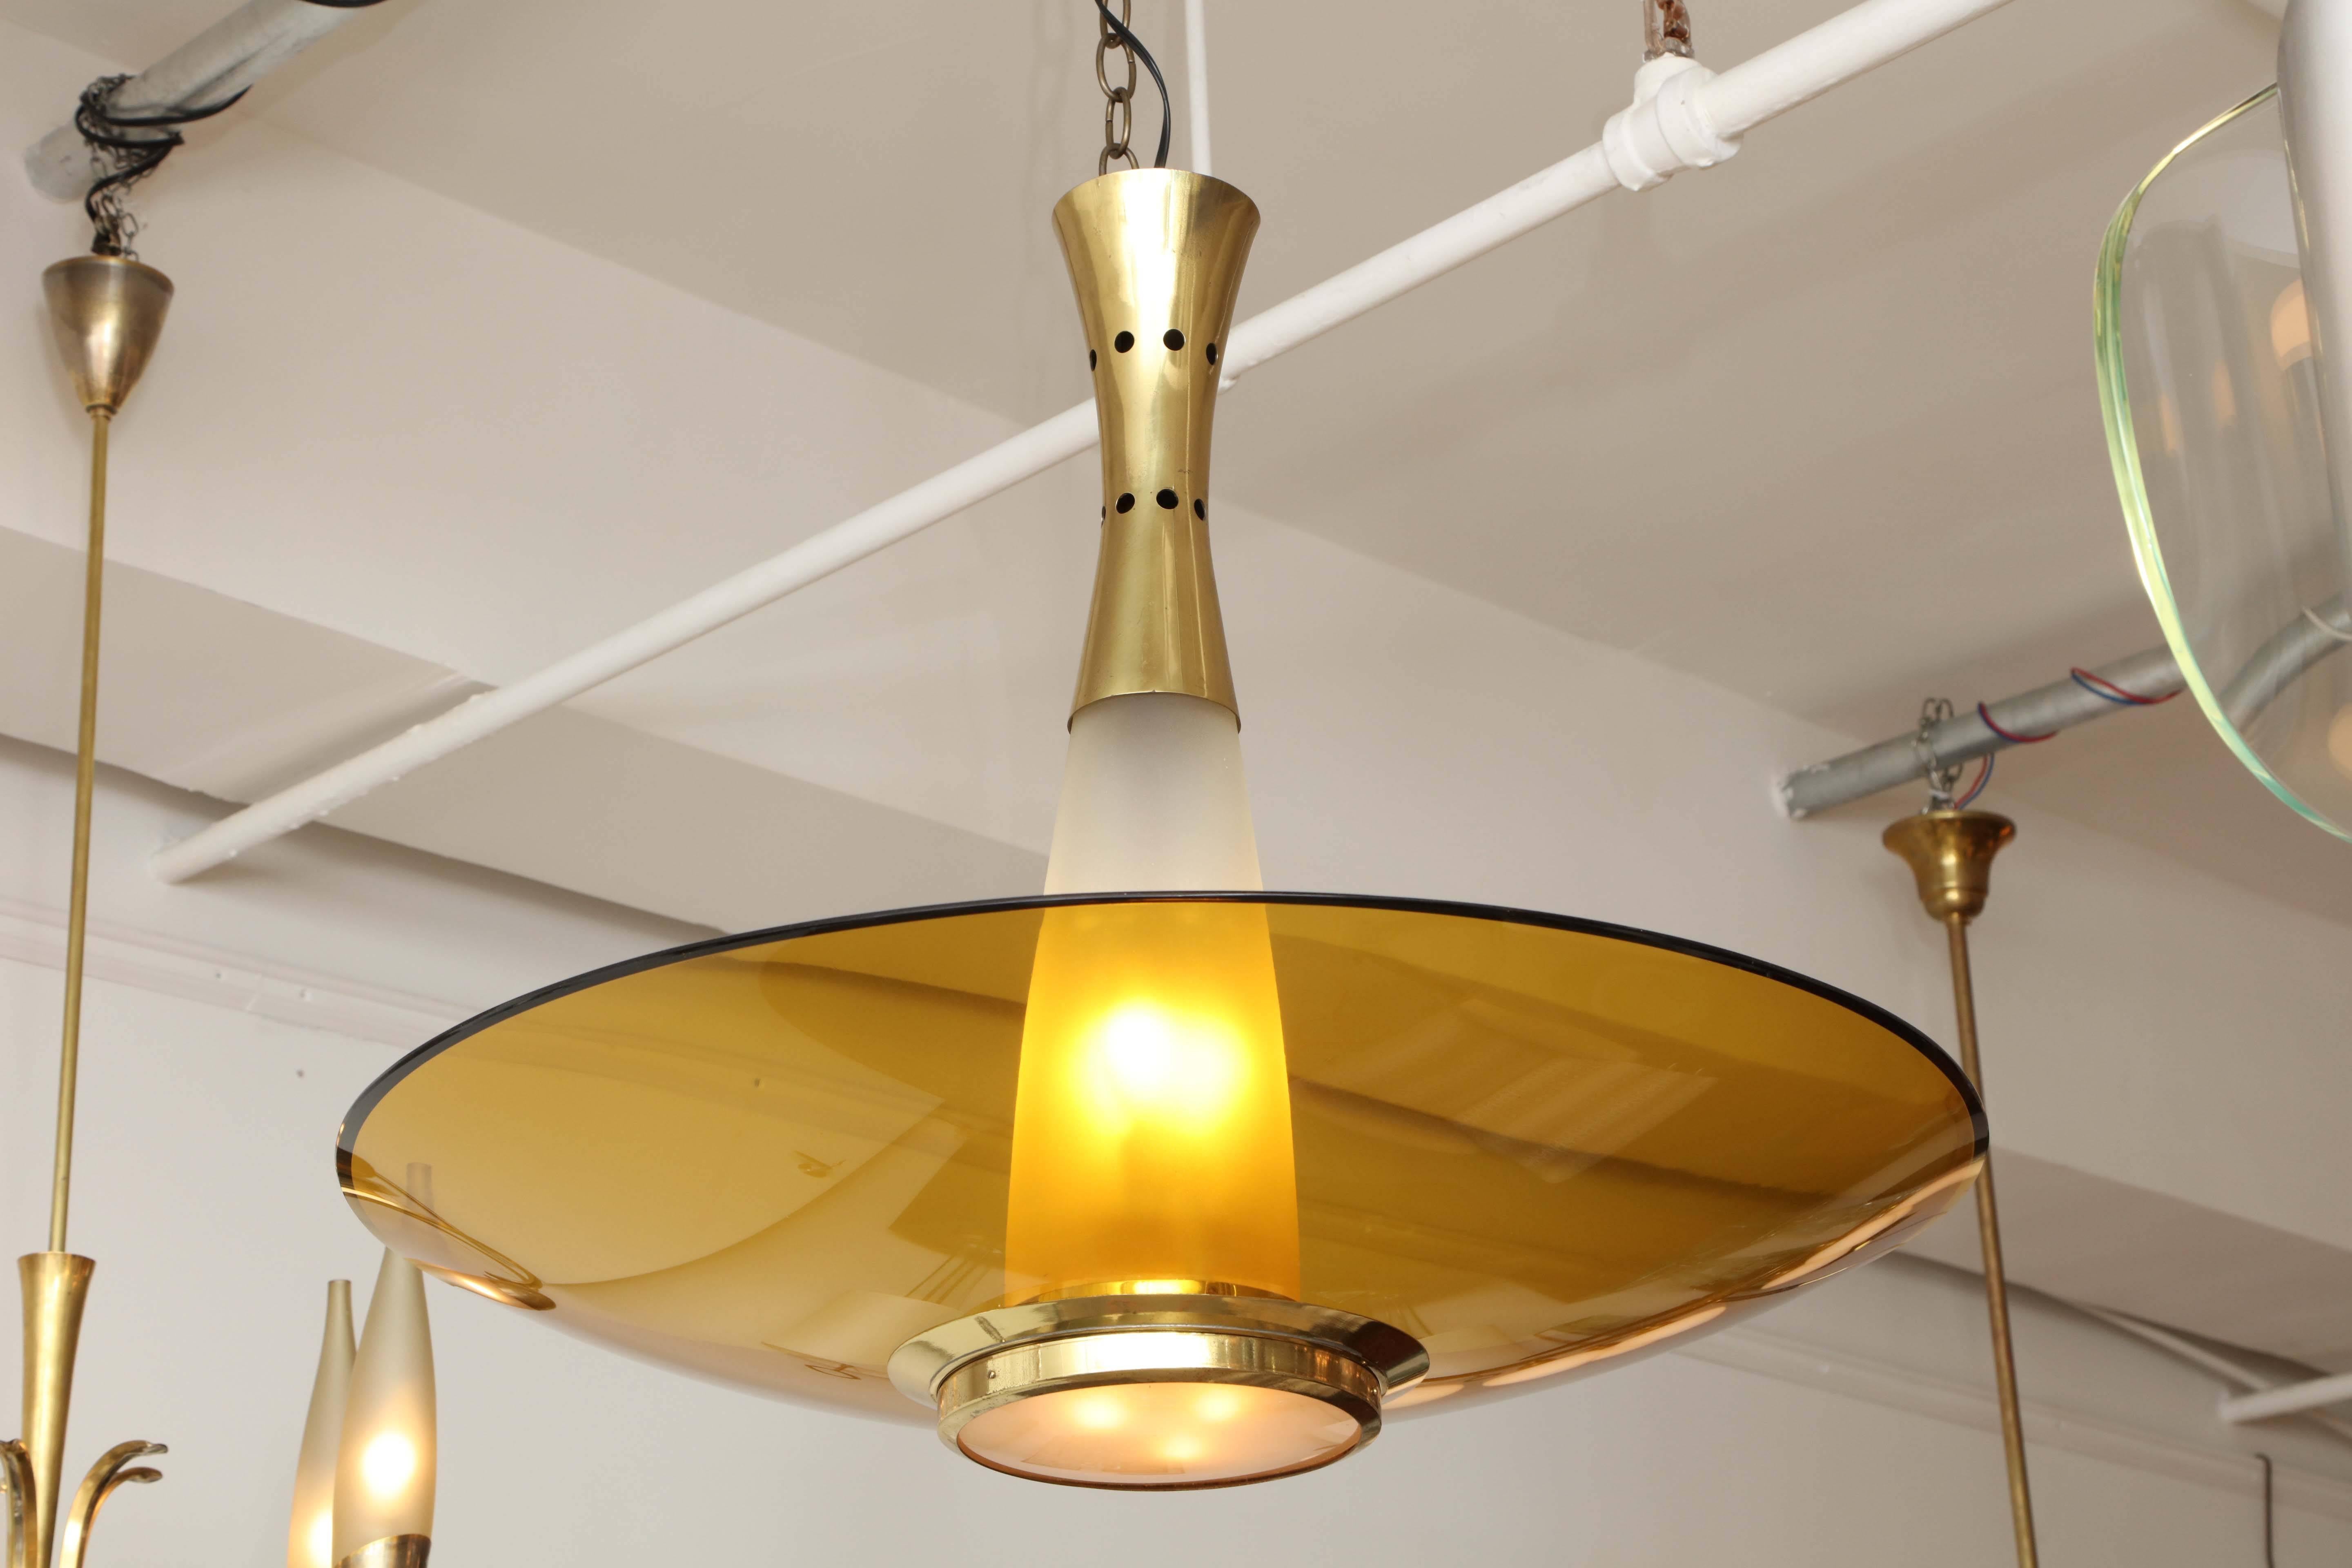 Modernist large chandelier made in Milan1955 by Fontana Arte designed by Max Ingrand. Amber curved glass shade with a bevelled polished edge, above is a frosted conical glass shade with a brass collar, great quality, takes six e14 bulbs.
 